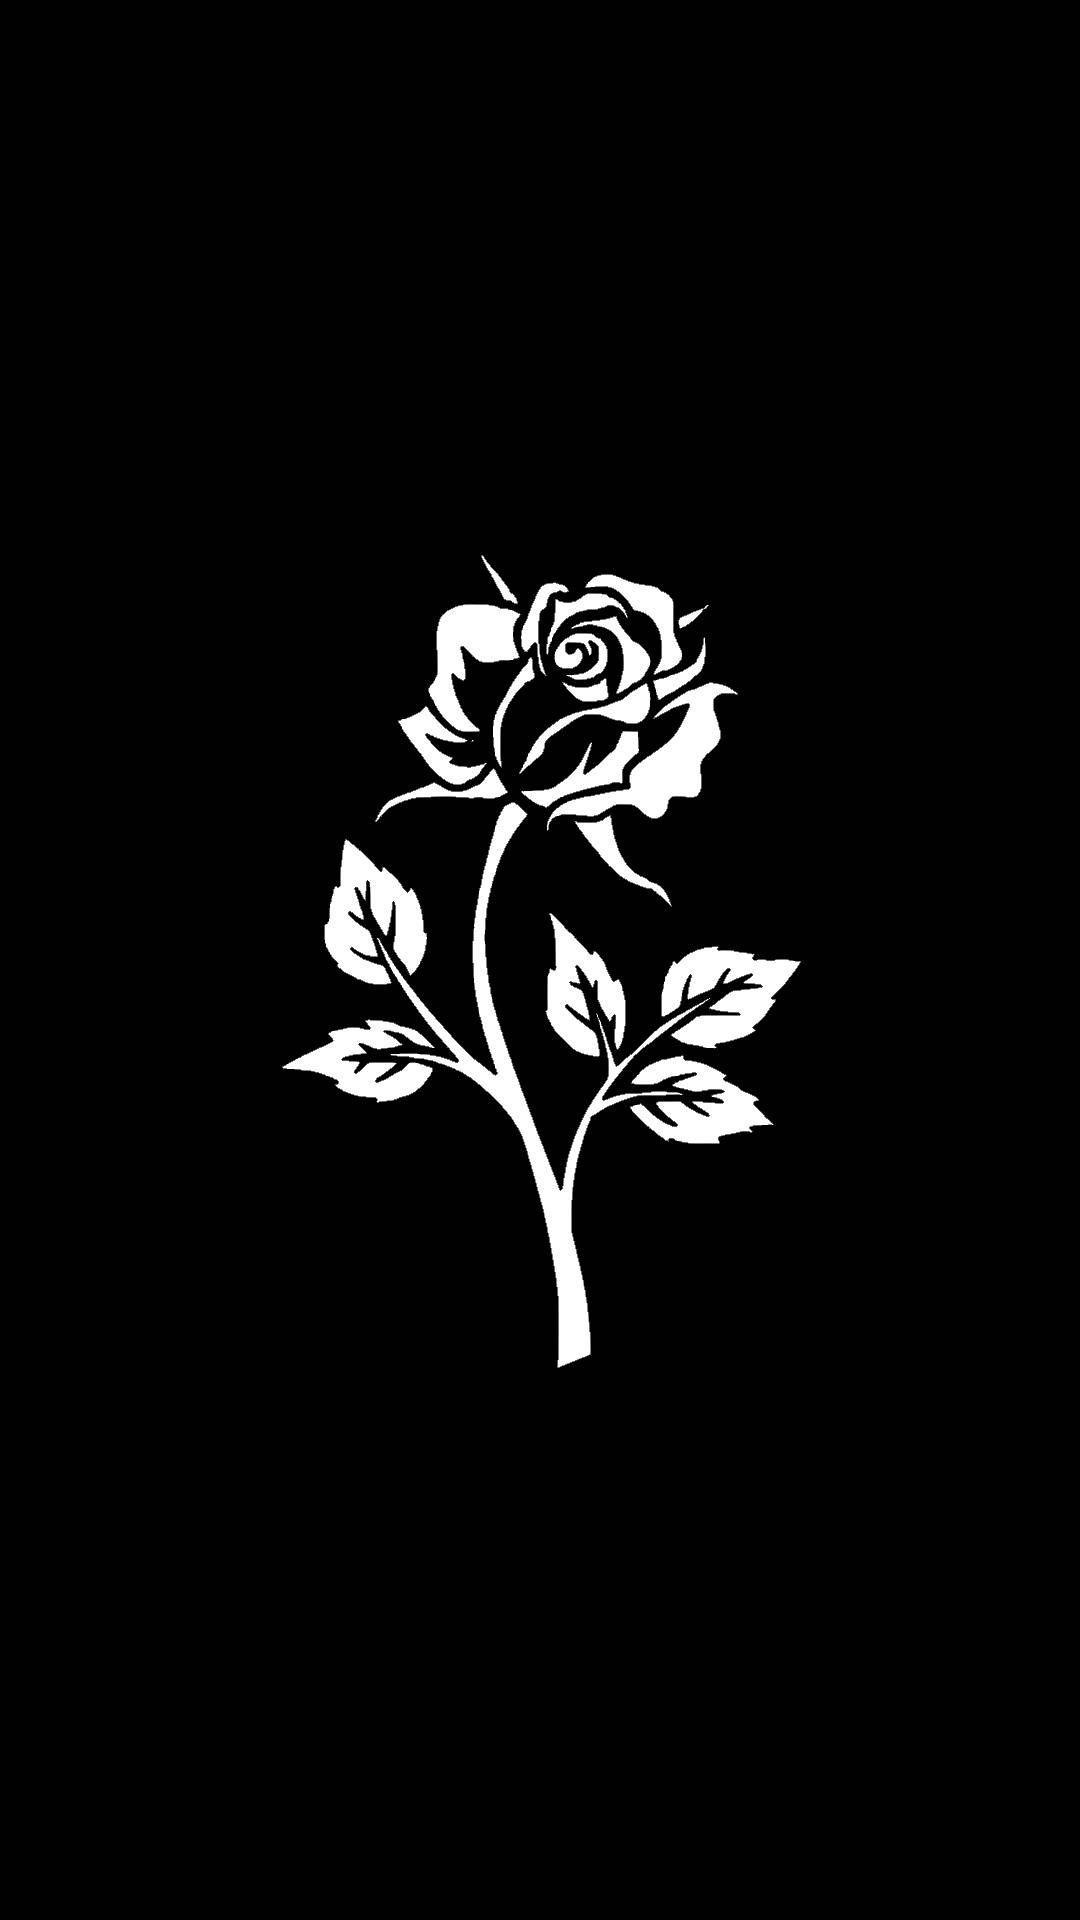 Black and White Roses iPhone Wallpapers - Top Free Black and White ...